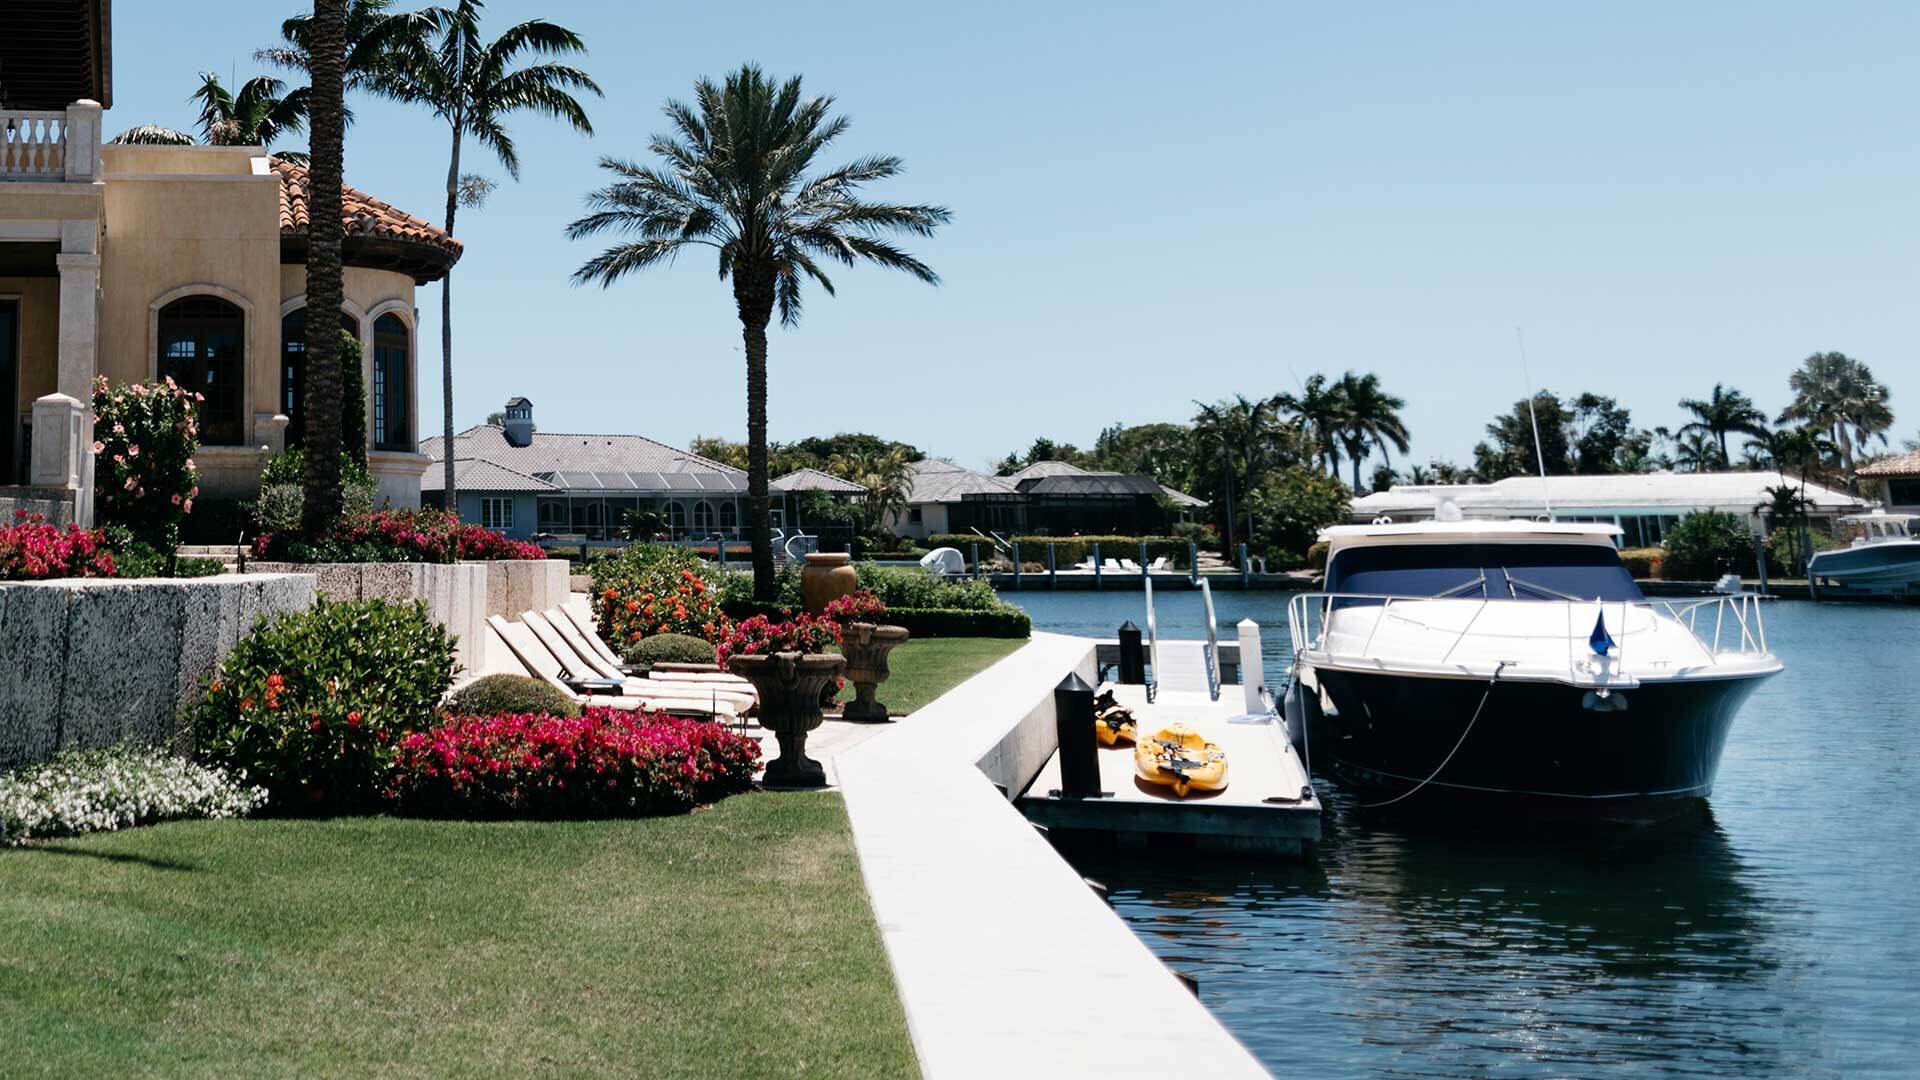 A photo of a small boat docked in the backyard of a luxurious Florida home.